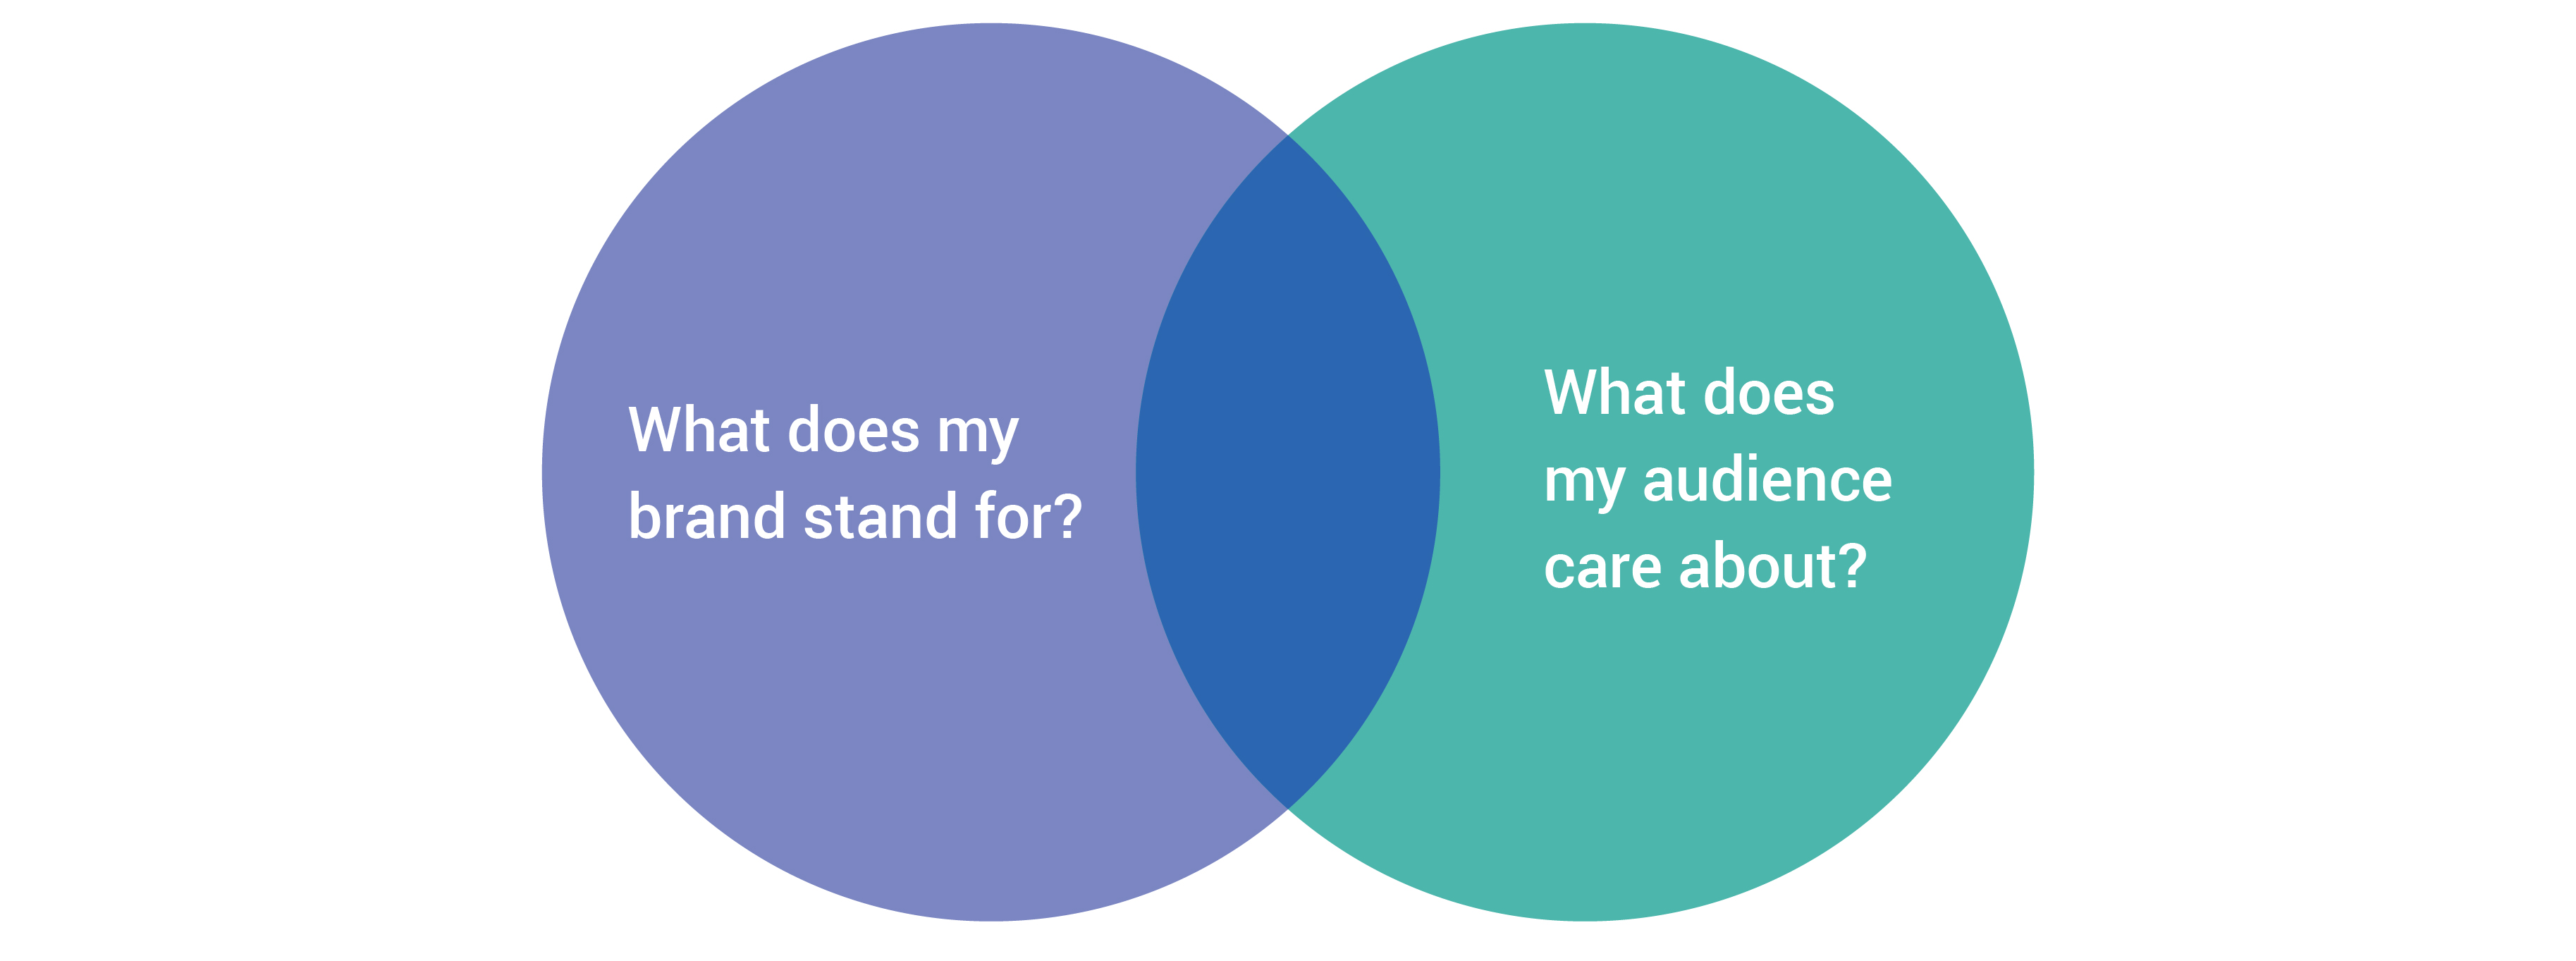 what-brands-stand-for-what-audiences-care-about-venn-diagram-3